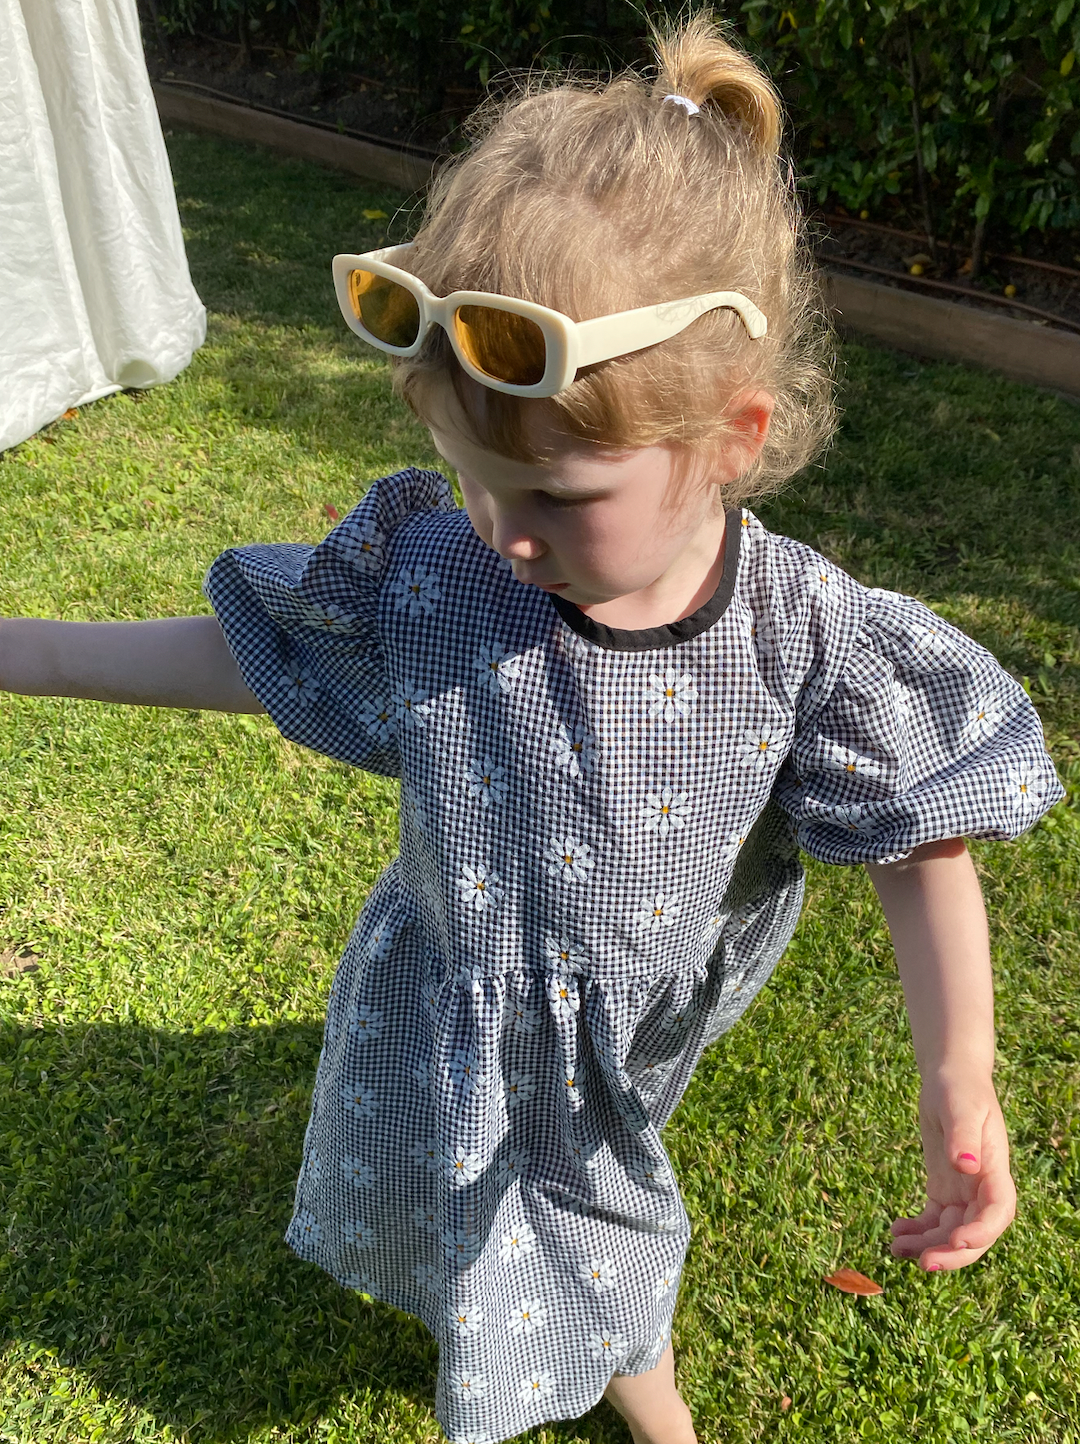 Ivory Matte | A child wearing a pair of kids' sunglasses with cream frames and brown lenses